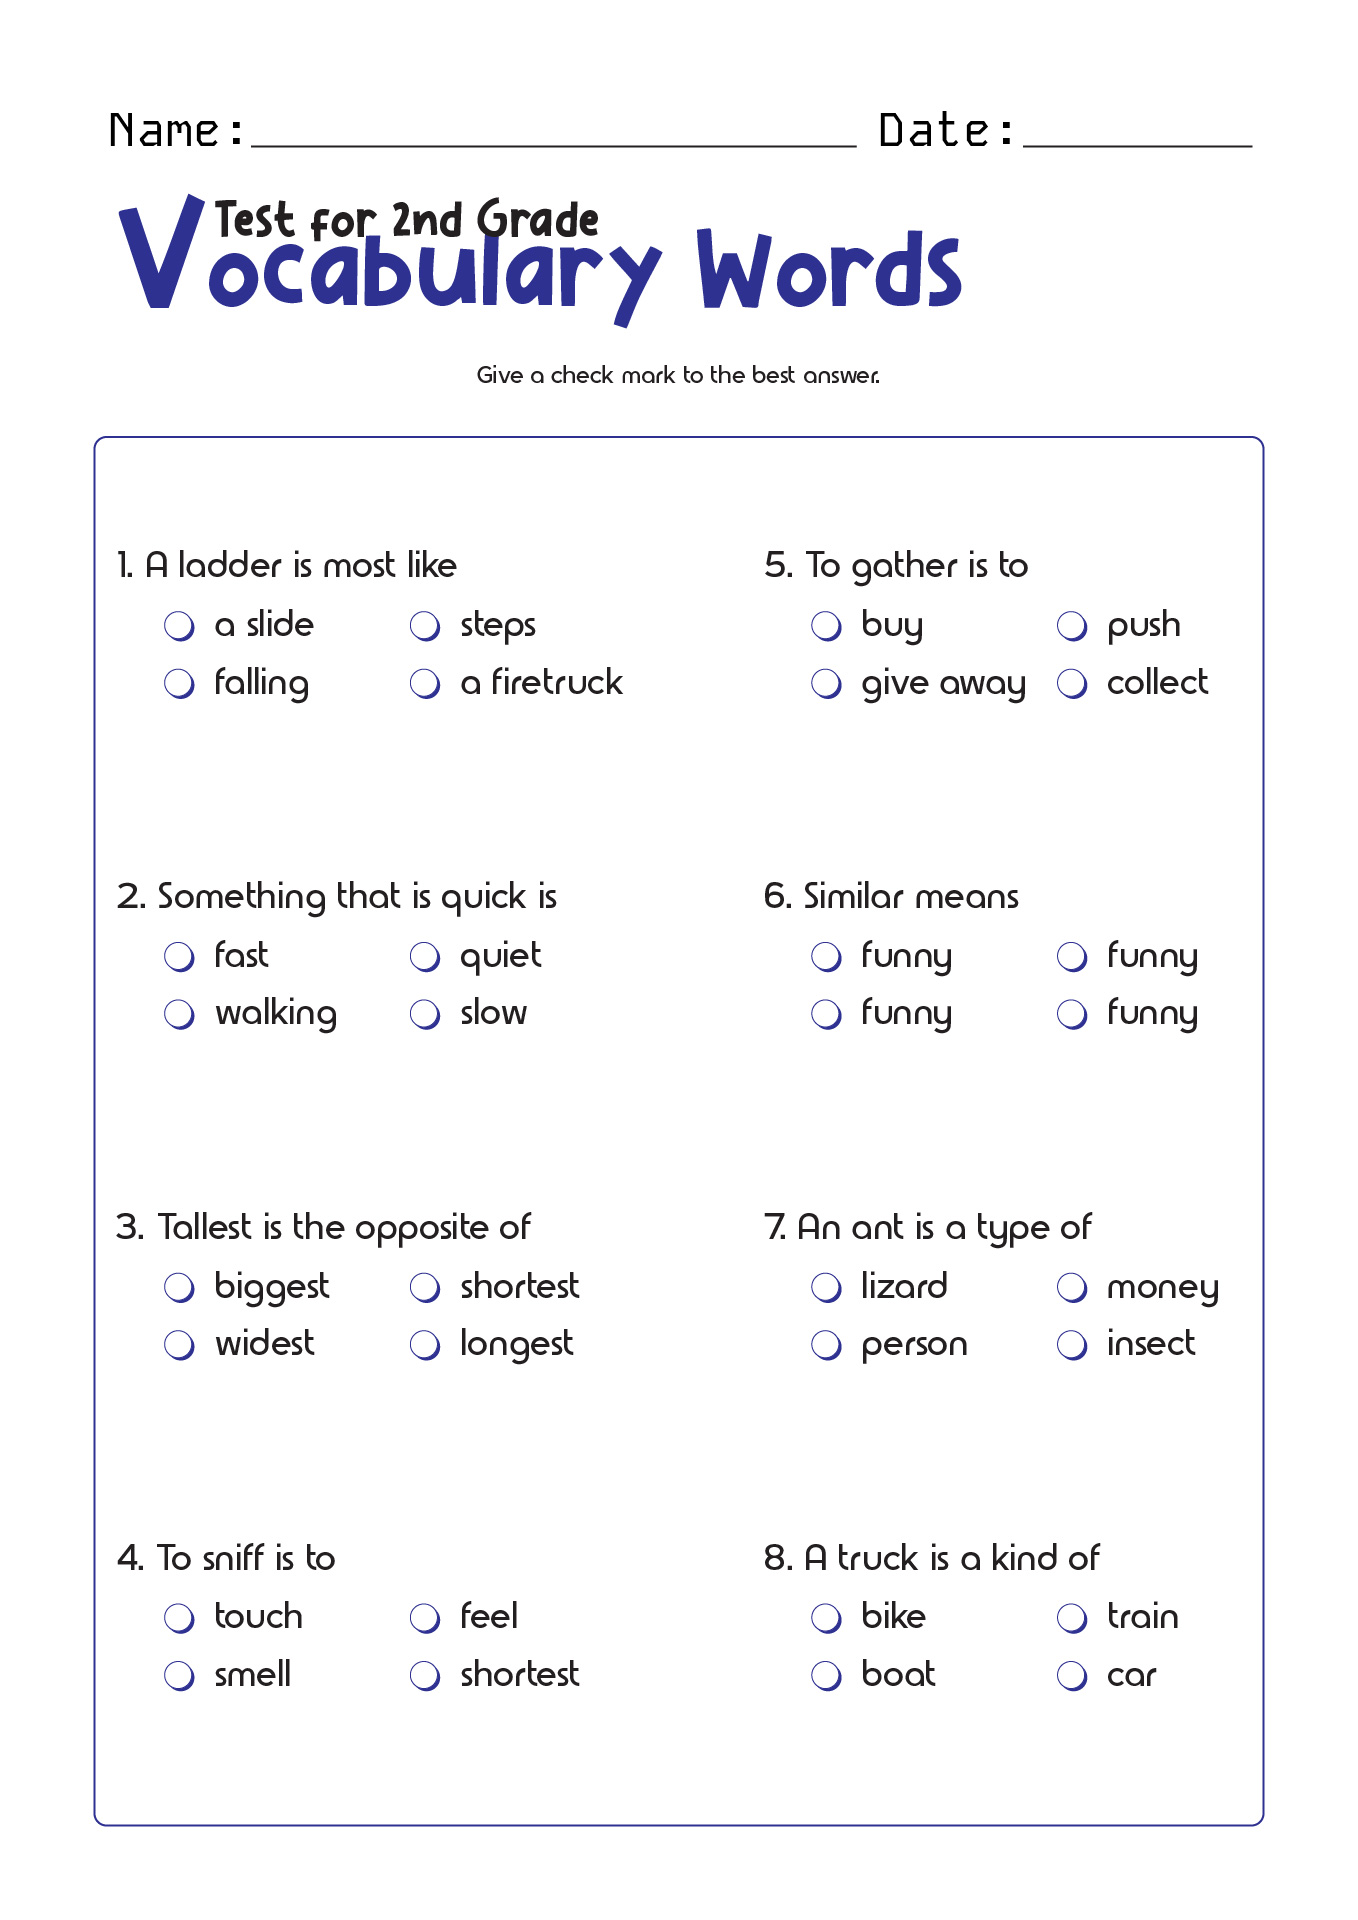 14 Best Images of Matching Definitions To Words Worksheets